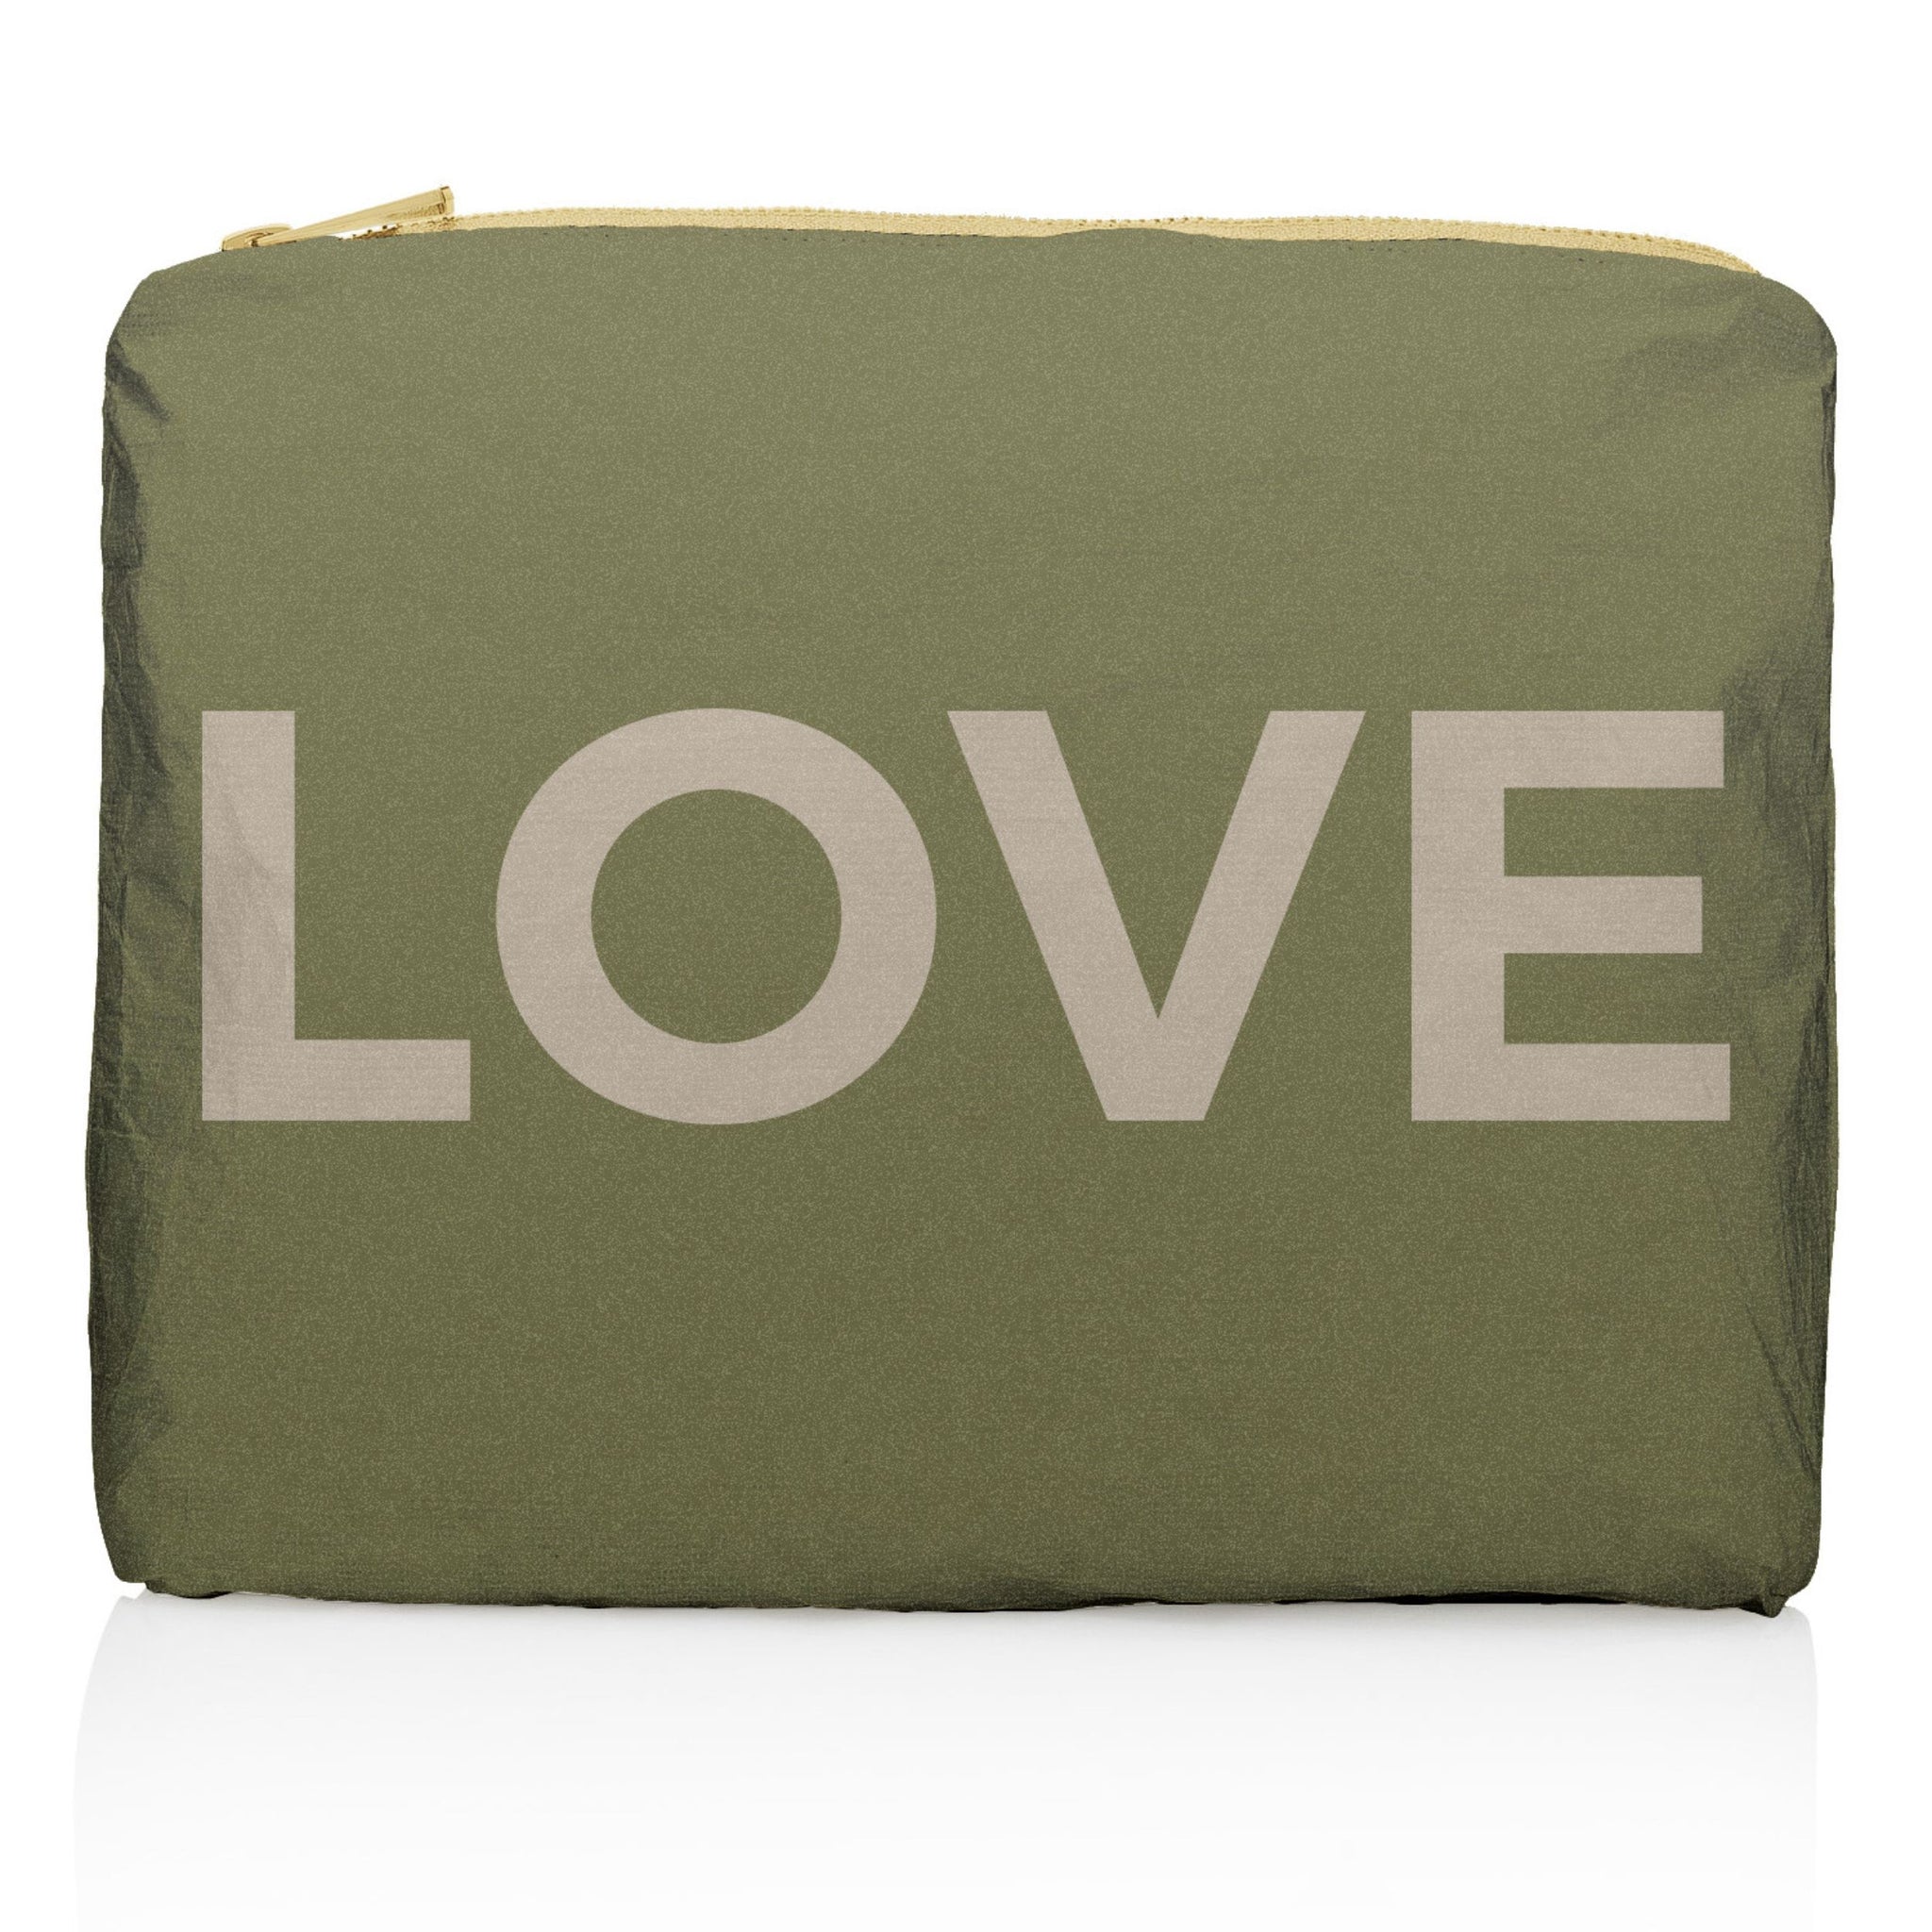 Medium Zipper Pack in Shimmer Army Green with Golden "LOVE"